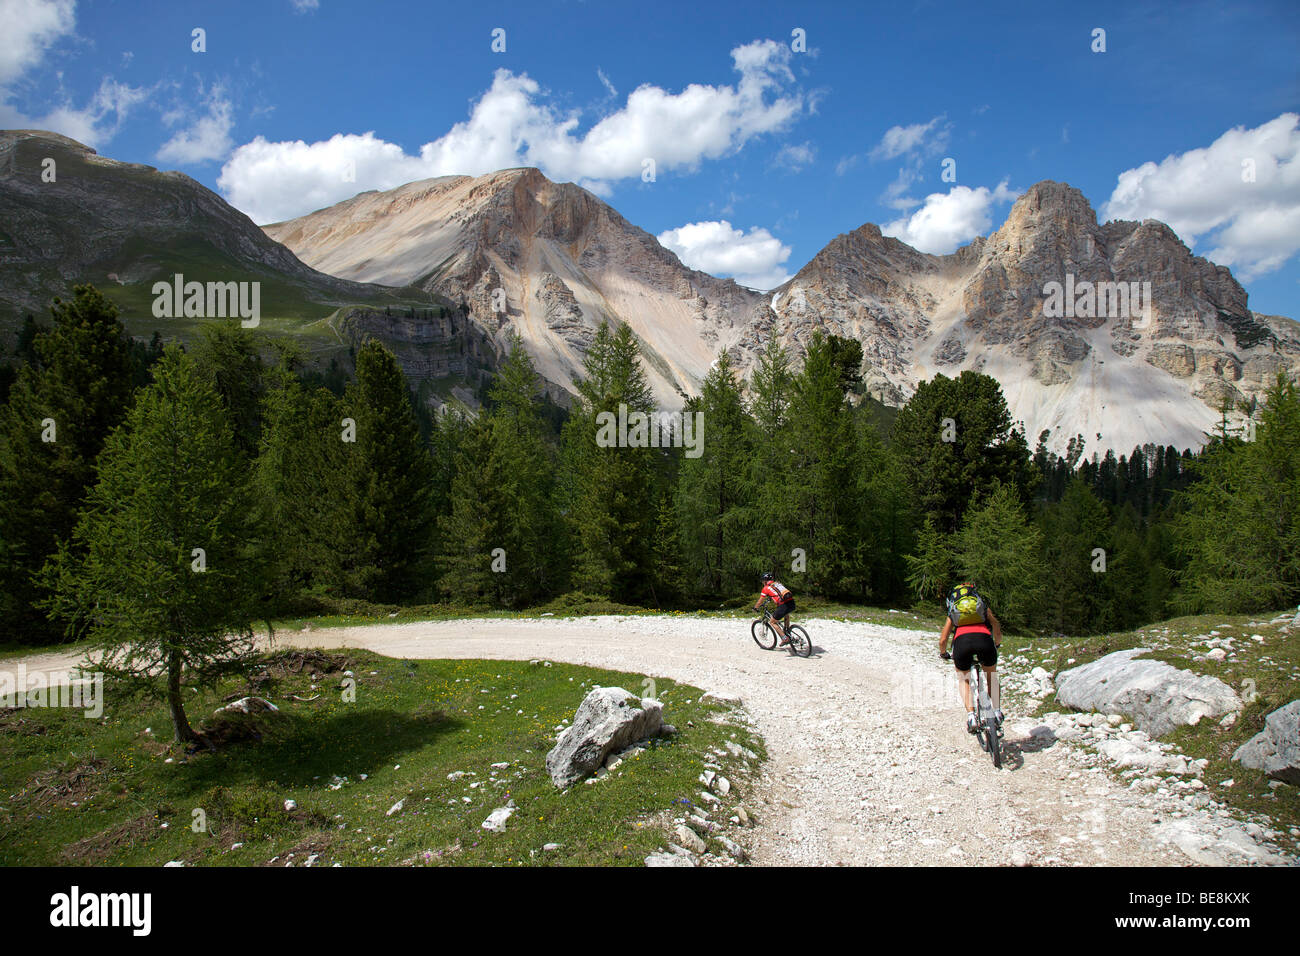 Mountain bike riders on the Limo Pass in Fanes-Sennes-Prags Nature Park, Trentino, Alto Adige, Italy, Europe Stock Photo